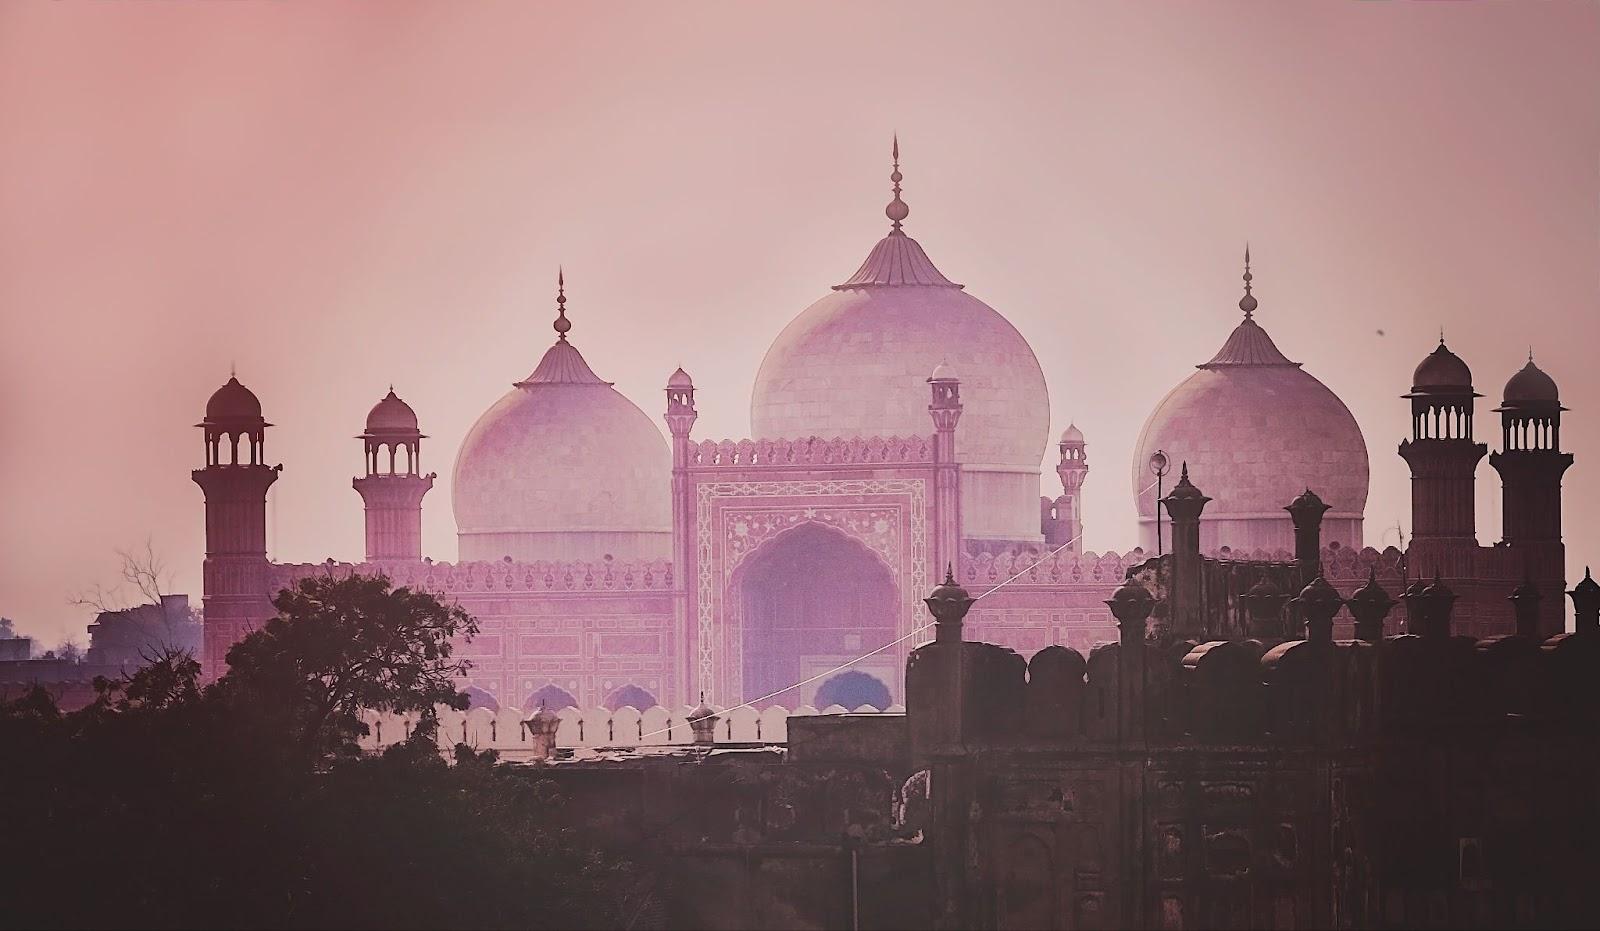 Domes of the The Badshahi Mosque (Emperor Mosque ) built in 1673 by the Mughal Emperor Aurangzeb in Lahore, Pakistan